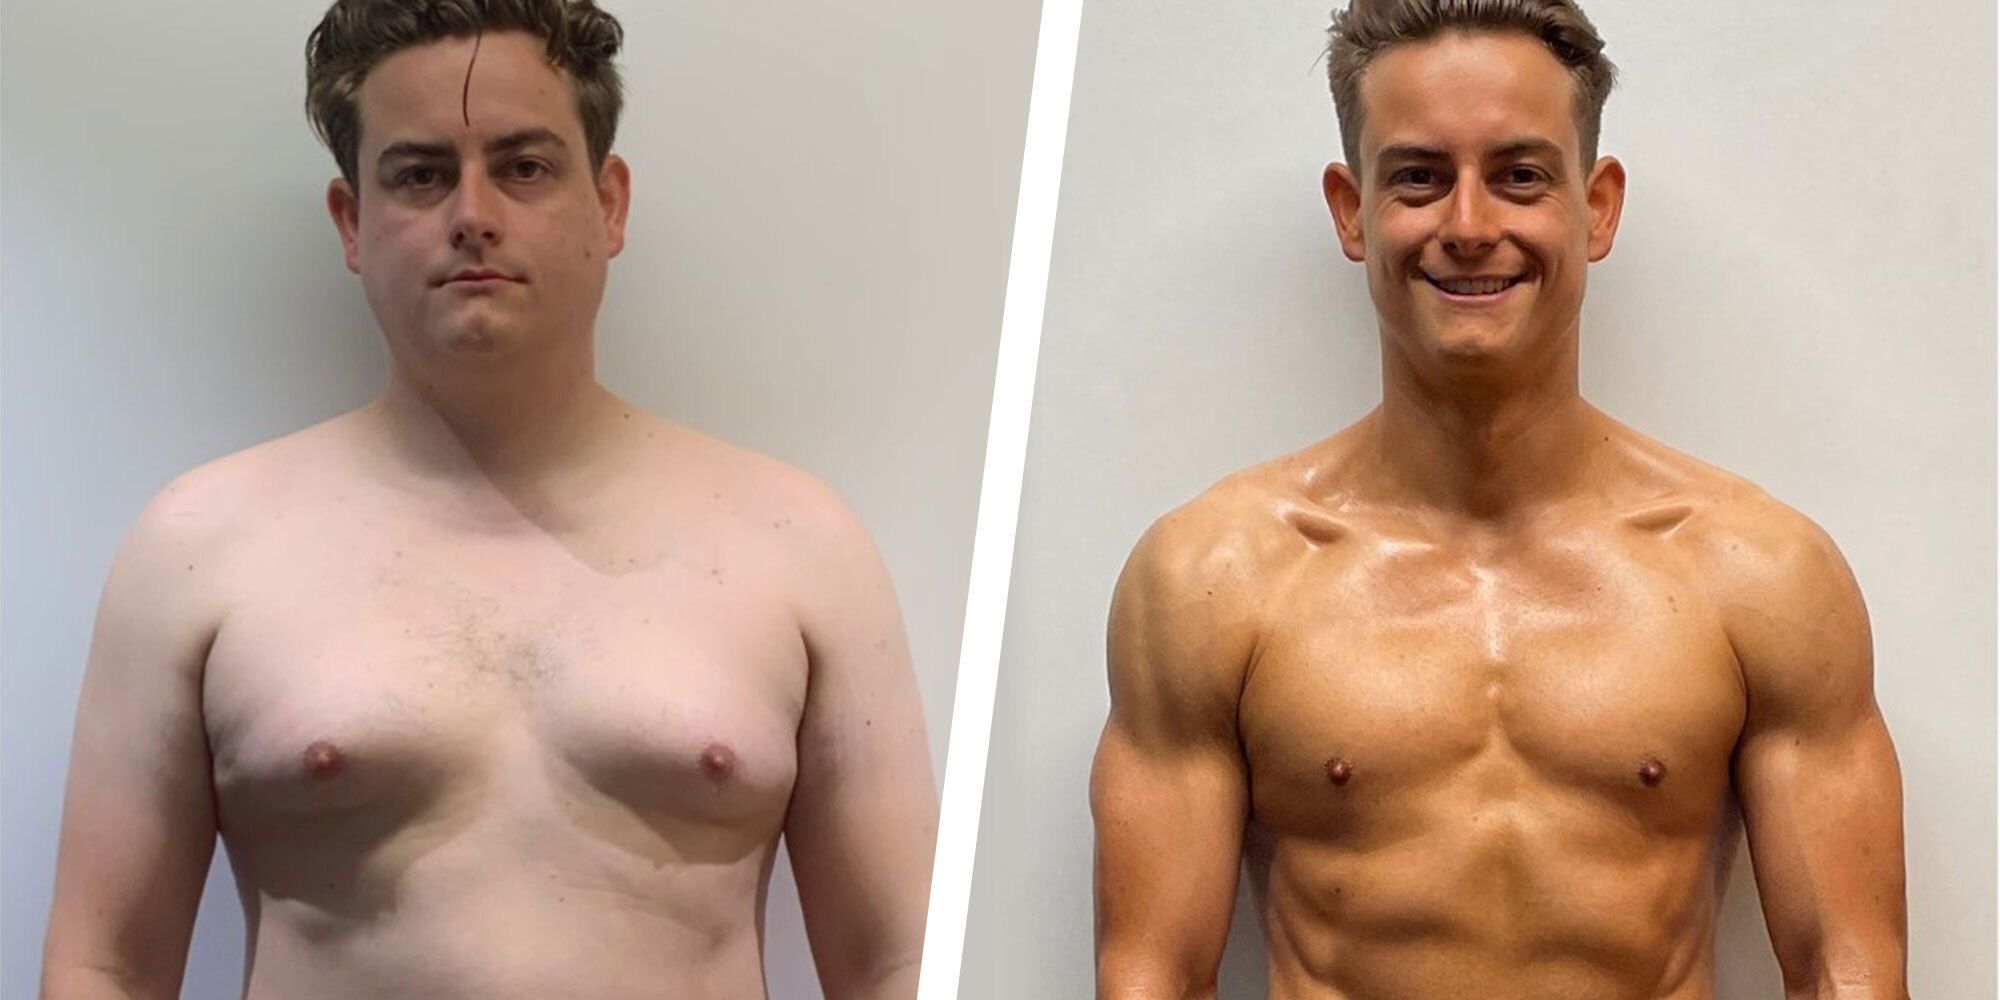 Weight loss: Man transforms body by losing 3st in 6 months and